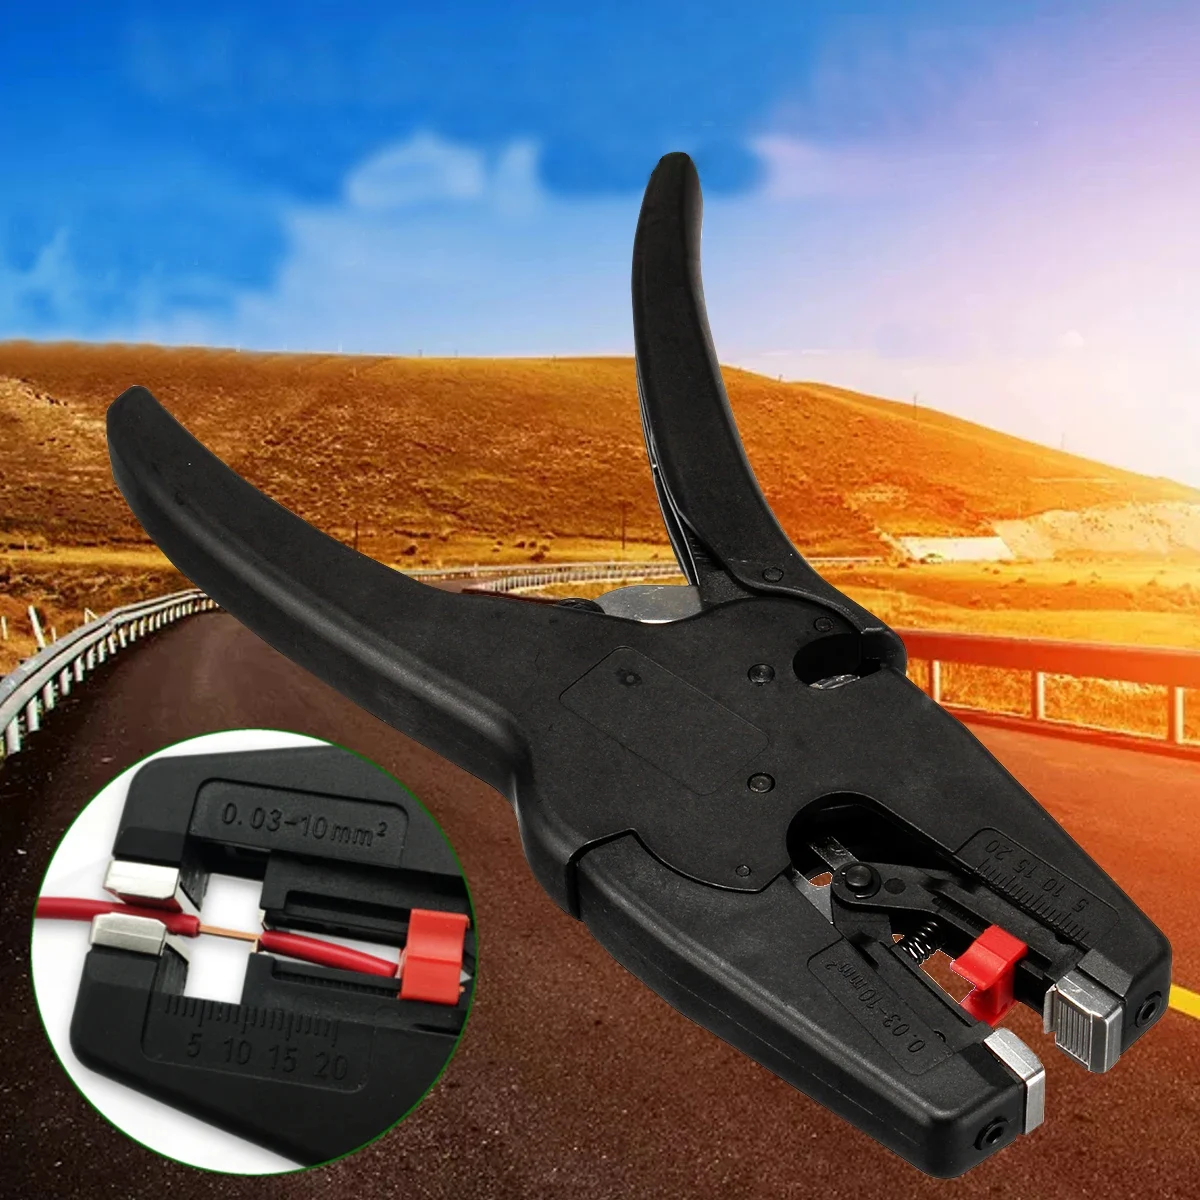 

Self-Adjusting insulation Wire Cable Stripper Range 0.03-10mm² Stripping Cutter Plier Terminal Crimper Tool